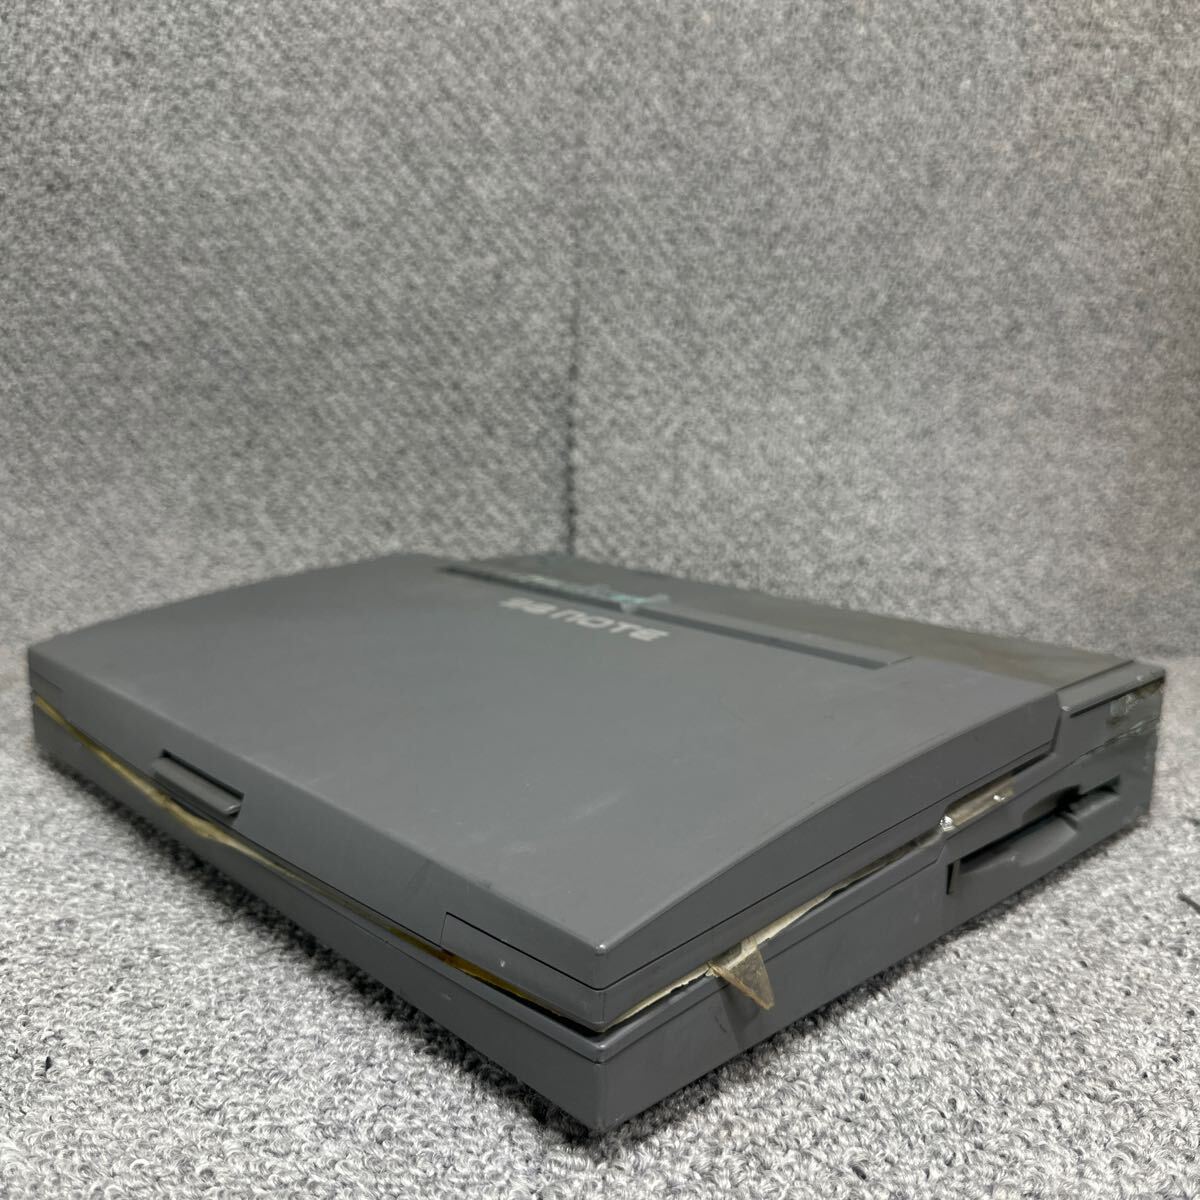 PCN98-1642 super-discount PC98 notebook NEC PC-9801NS/A electrification un- possible Junk including in a package possibility 